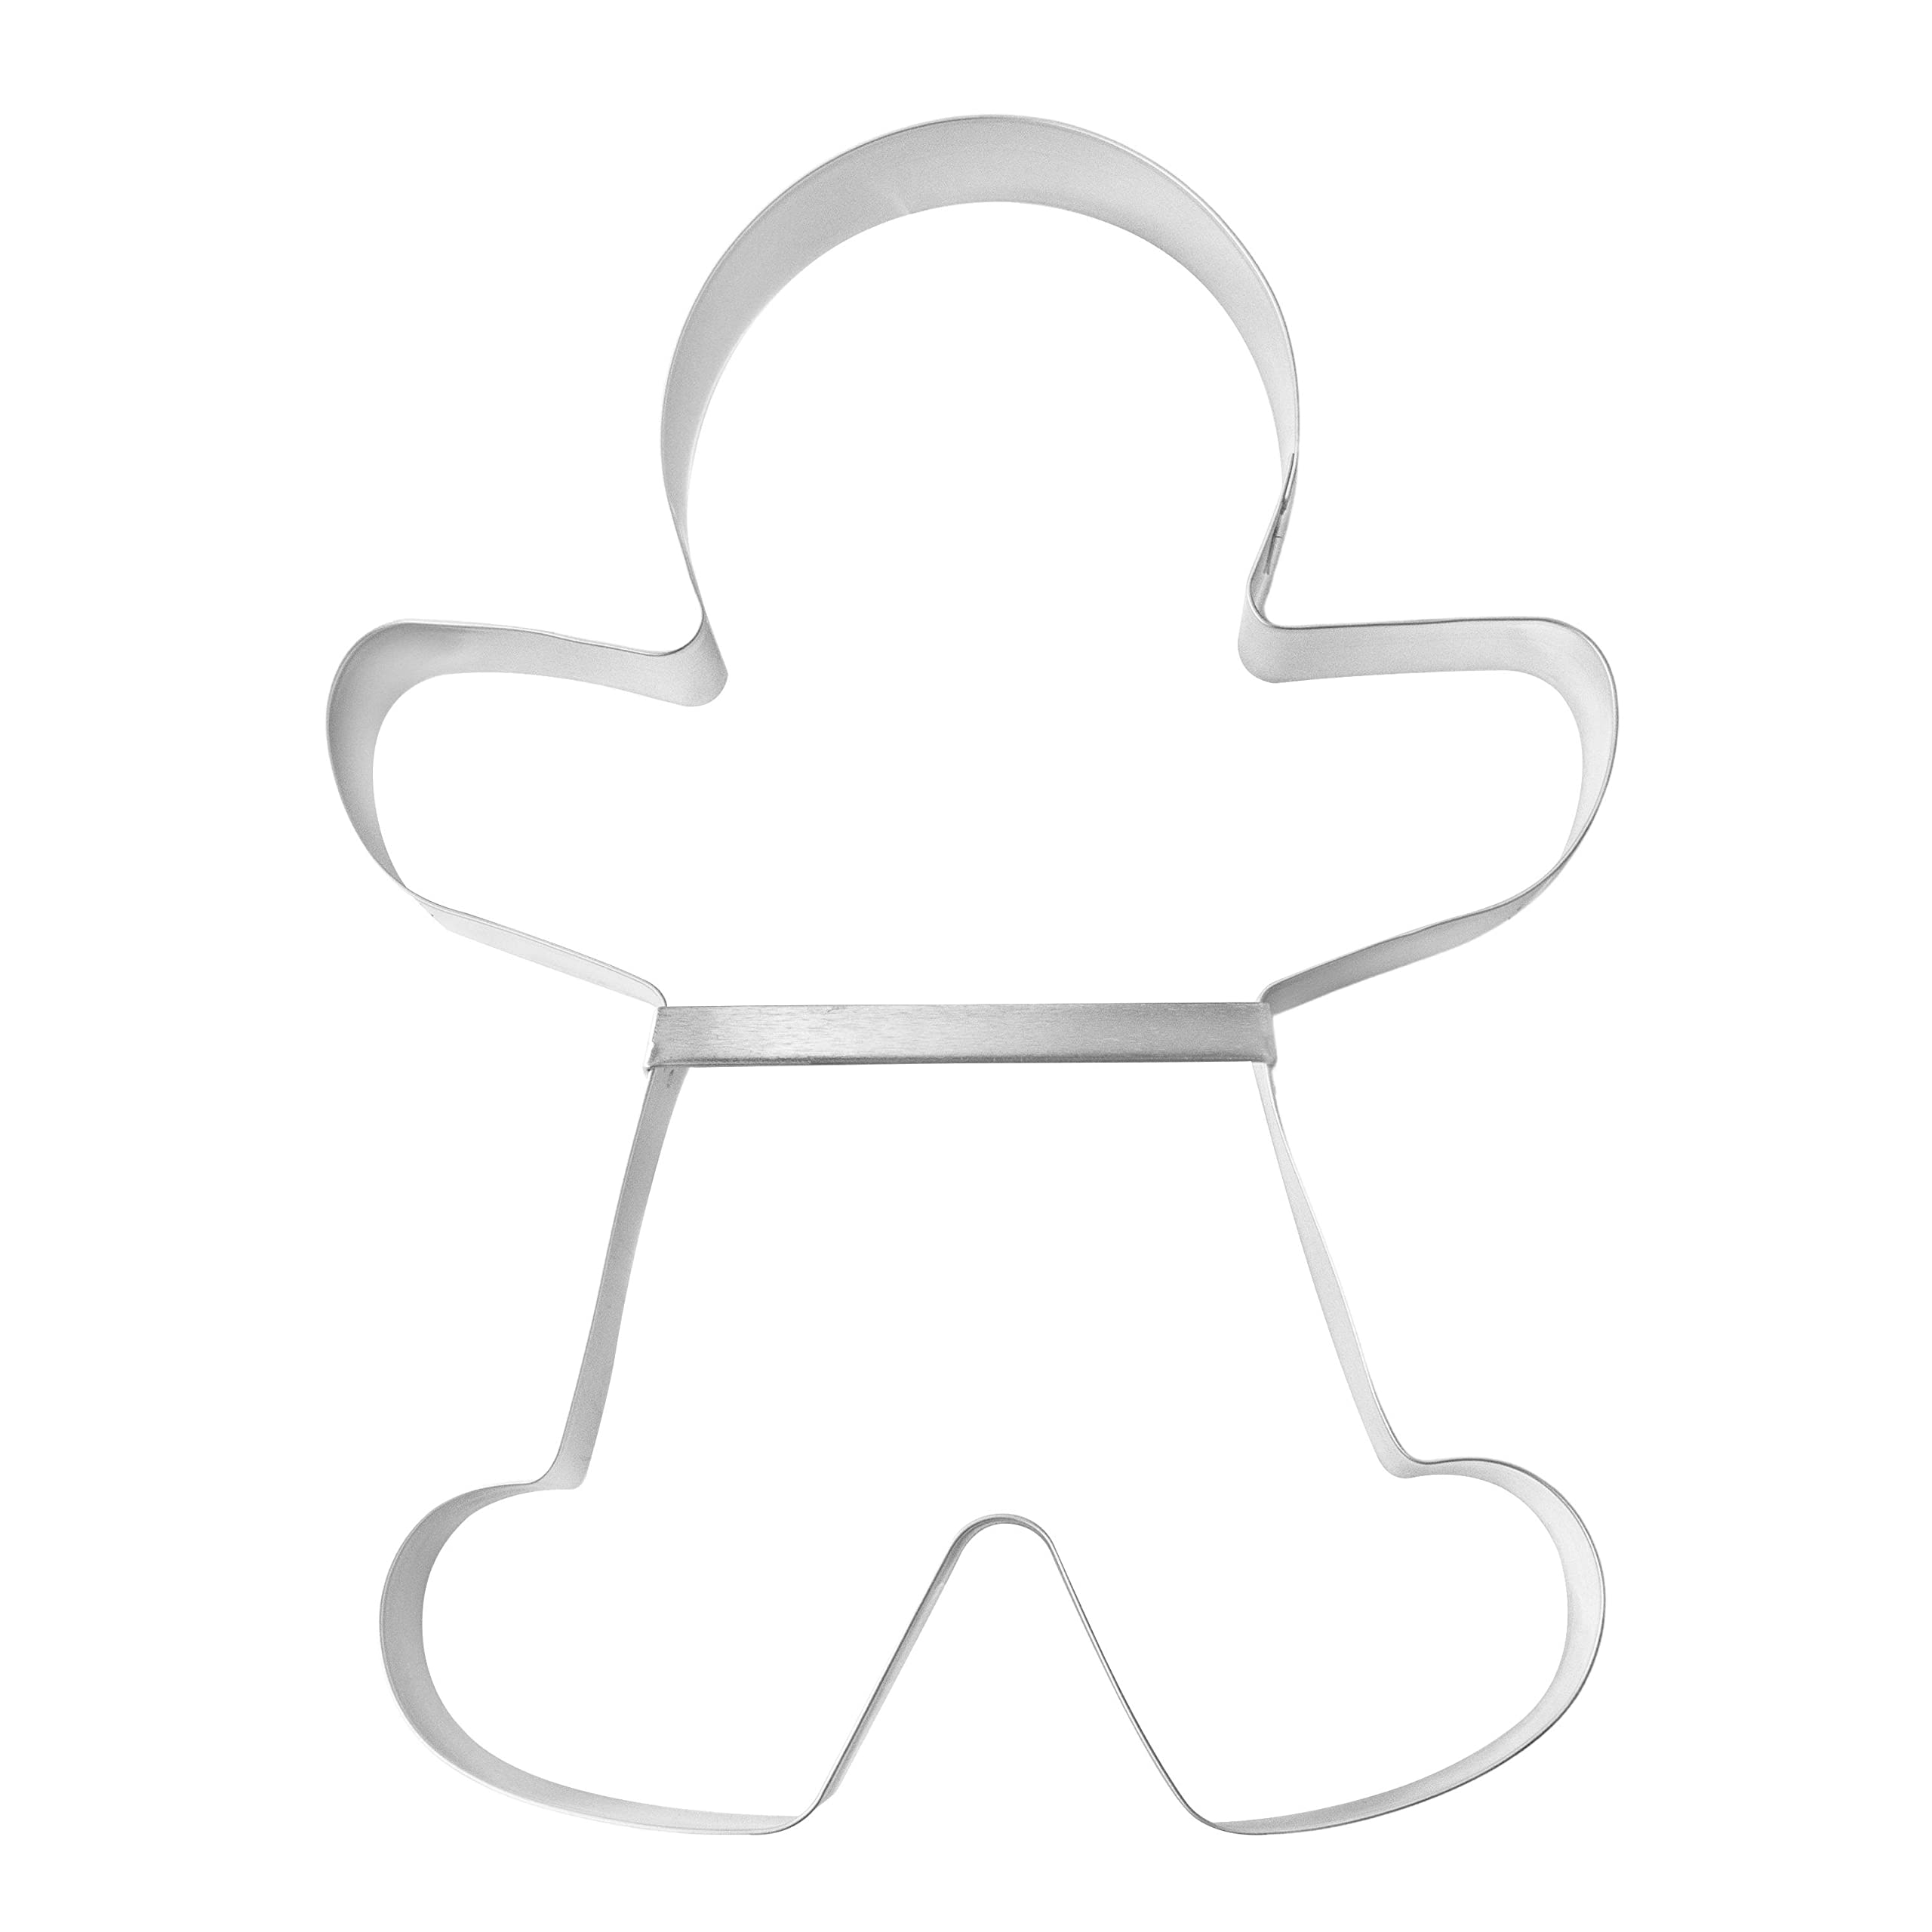 Foose Cookie Cutters Extra Large Gingerbread Man with Brace Cookie Cutter 8.5 in, Hand Made in USA